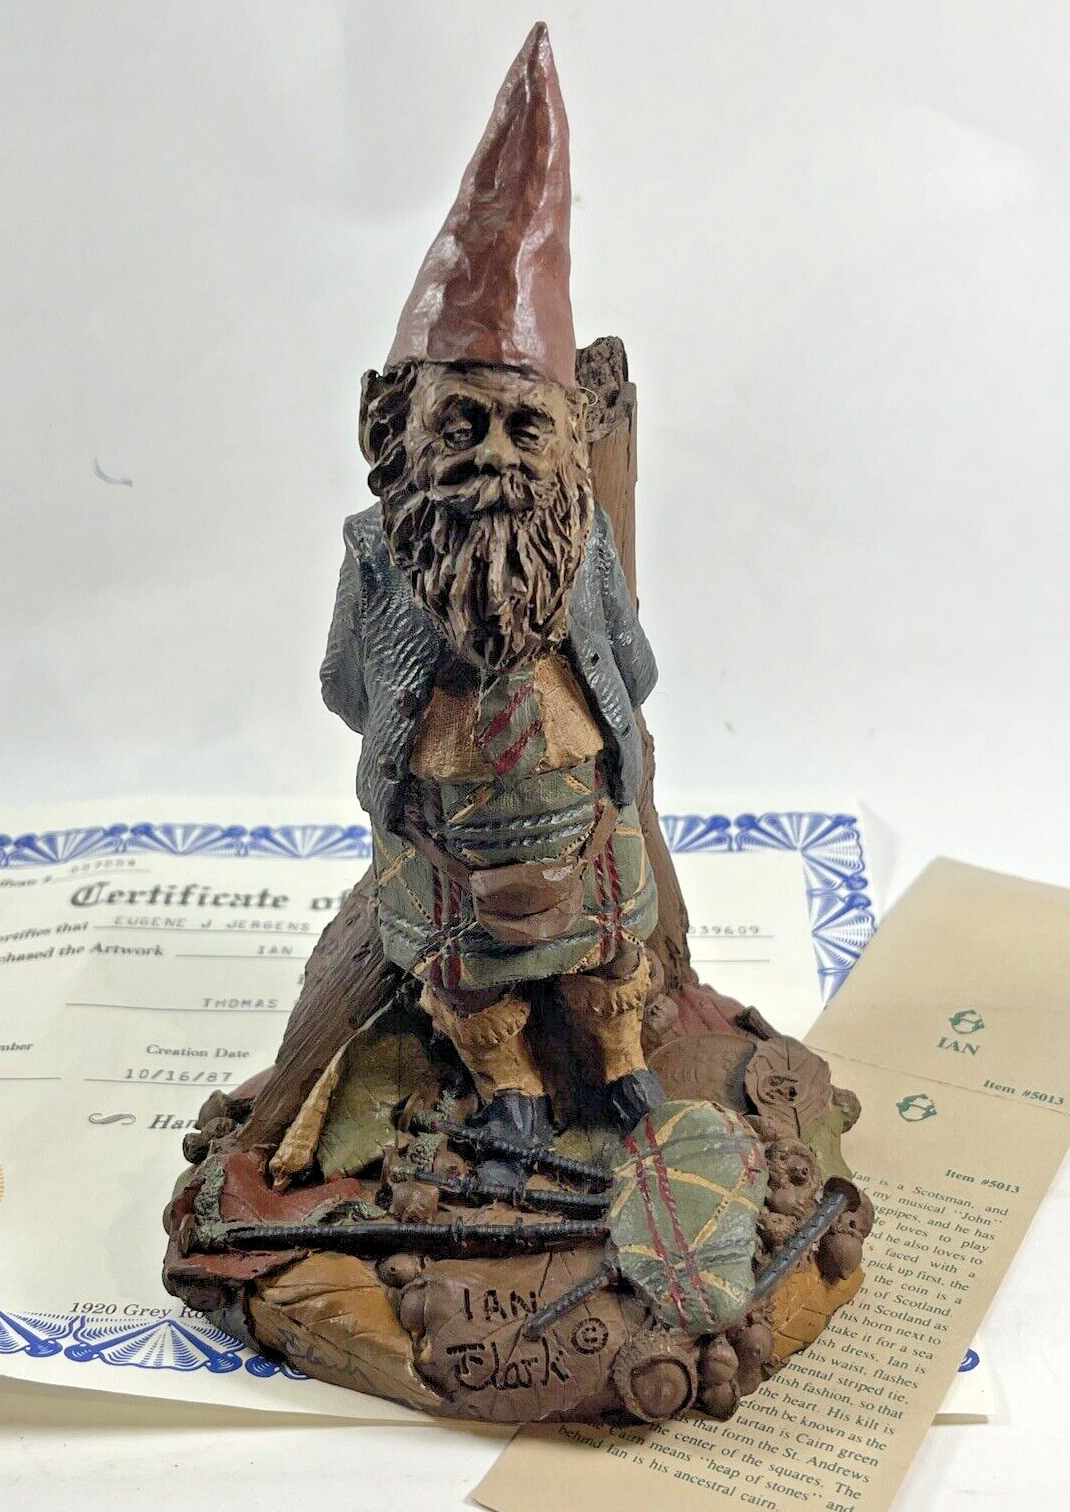 Vintage Ian Tom Clark Gnome Cairn Studios with COA & Story Signed